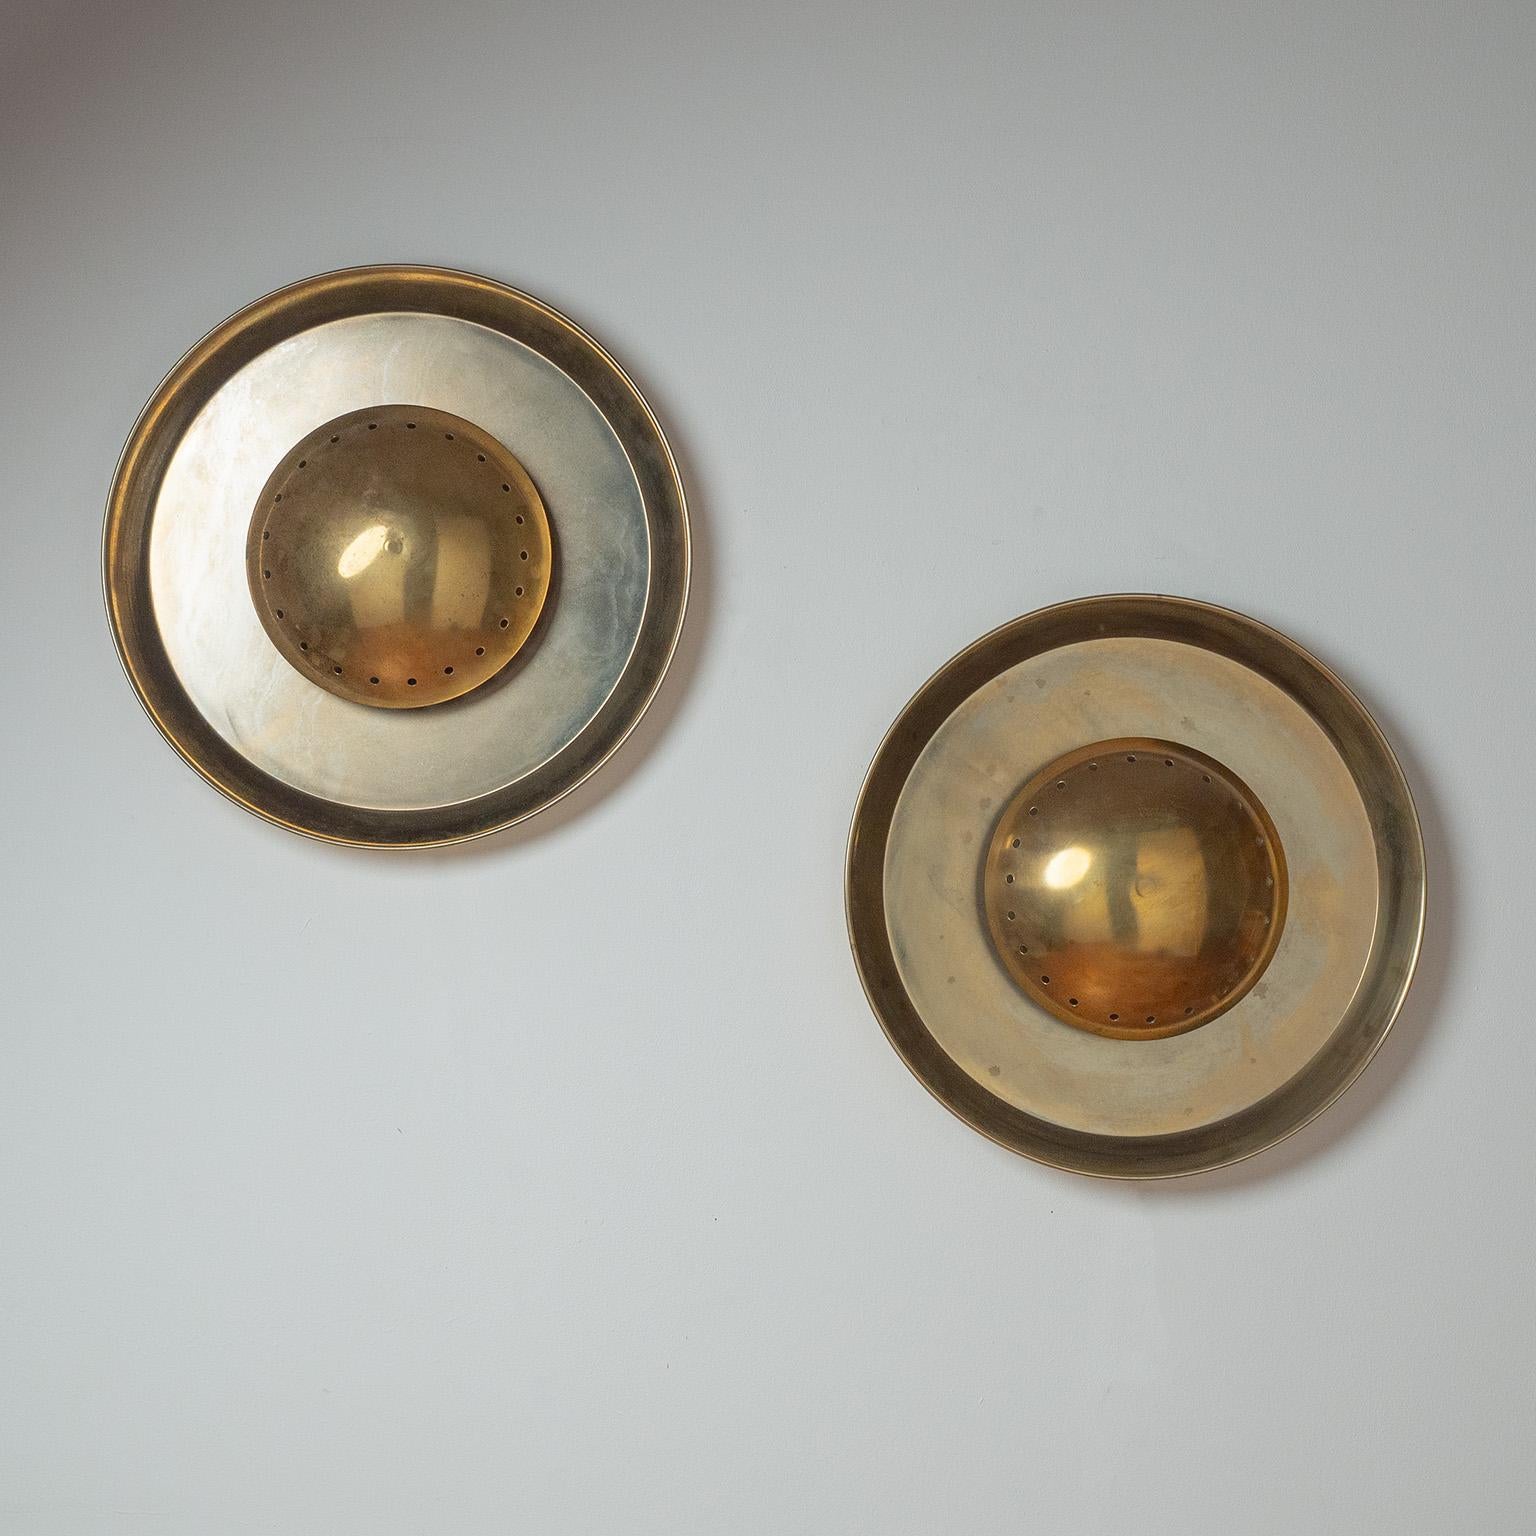 Fine pair of large Italian brass wall lights in the manner of Stilnovo. Large brass-plated steel backplate with a central perforated brass dome in the center, under which the two lights are positioned. Nice original condition with some patina on the